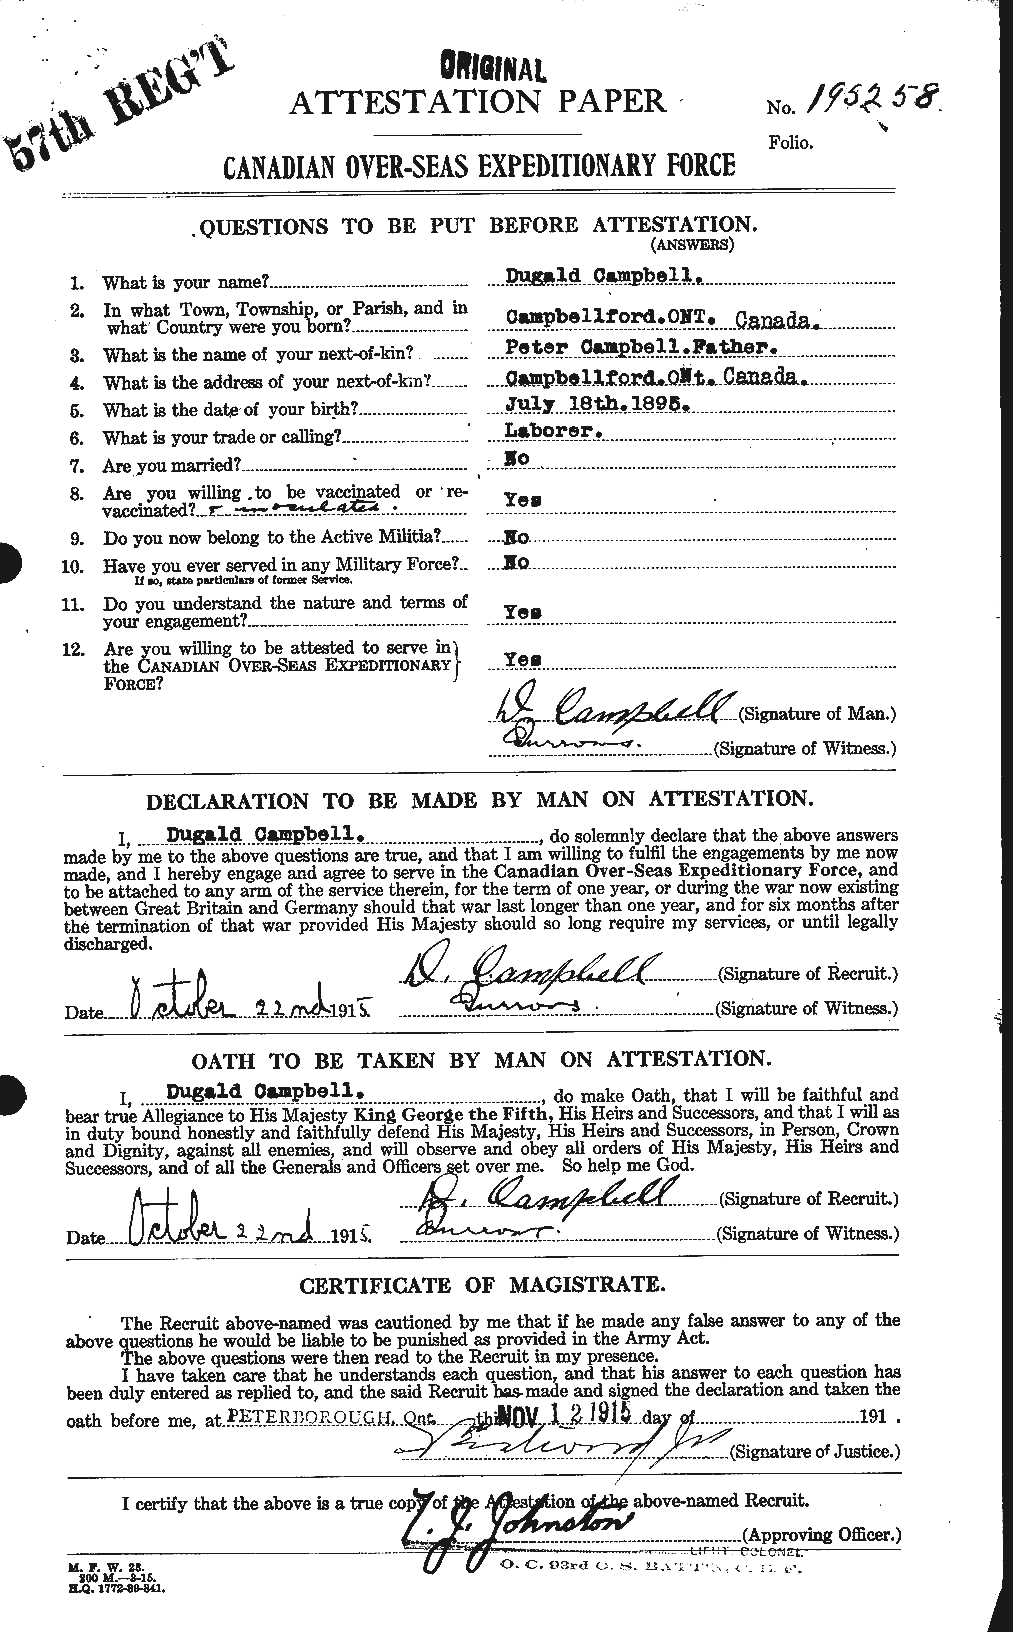 Personnel Records of the First World War - CEF 003631a